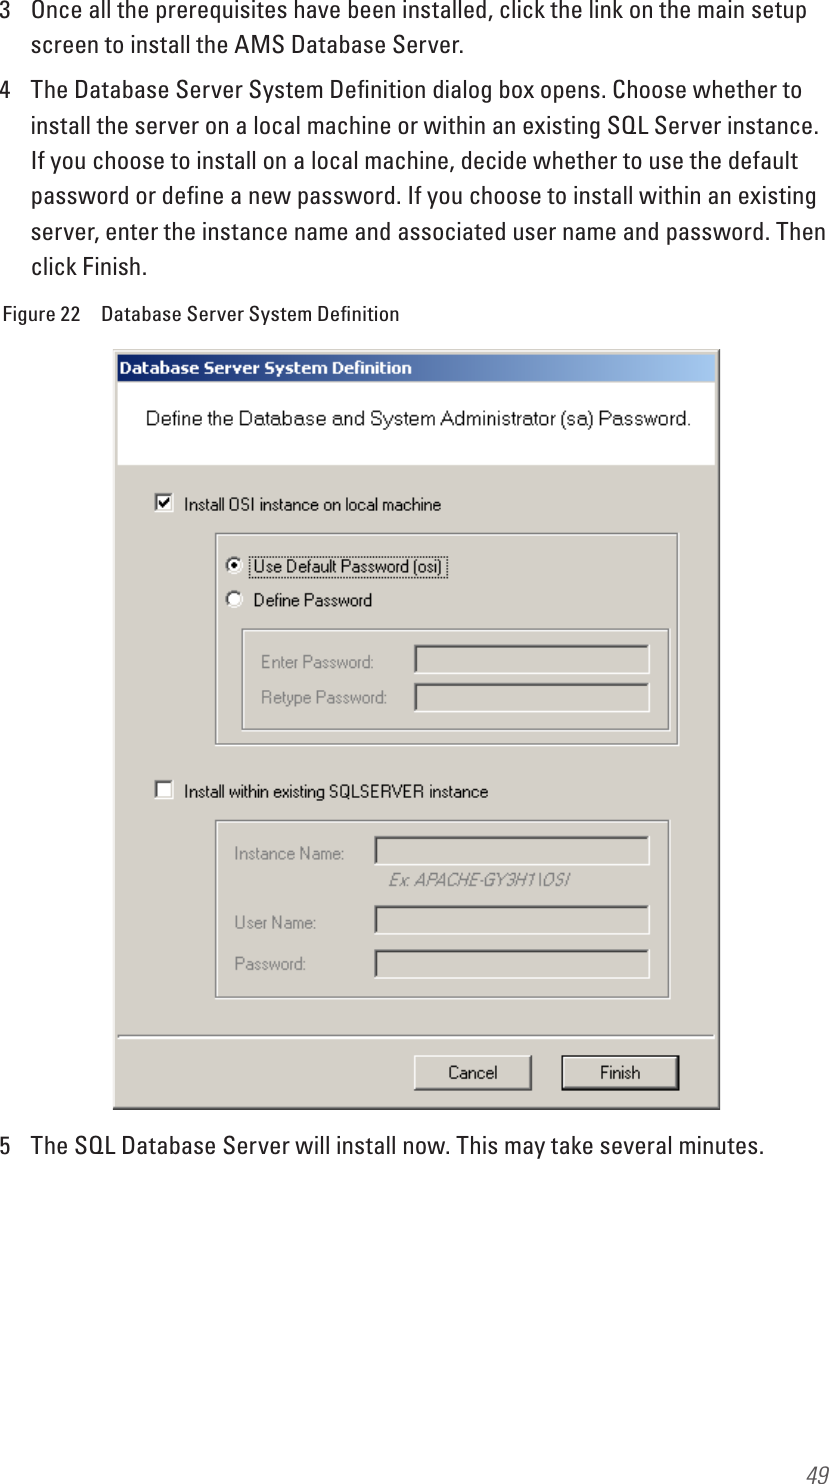 493  Once all the prerequisites have been installed, click the link on the main setup screen to install the AMS Database Server.4  The Database Server System Deﬁnition dialog box opens. Choose whether to install the server on a local machine or within an existing SQL Server instance. If you choose to install on a local machine, decide whether to use the default password or deﬁne a new password. If you choose to install within an existing server, enter the instance name and associated user name and password. Then click Finish.Figure 22  Database Server System Deﬁnition5  The SQL Database Server will install now. This may take several minutes.